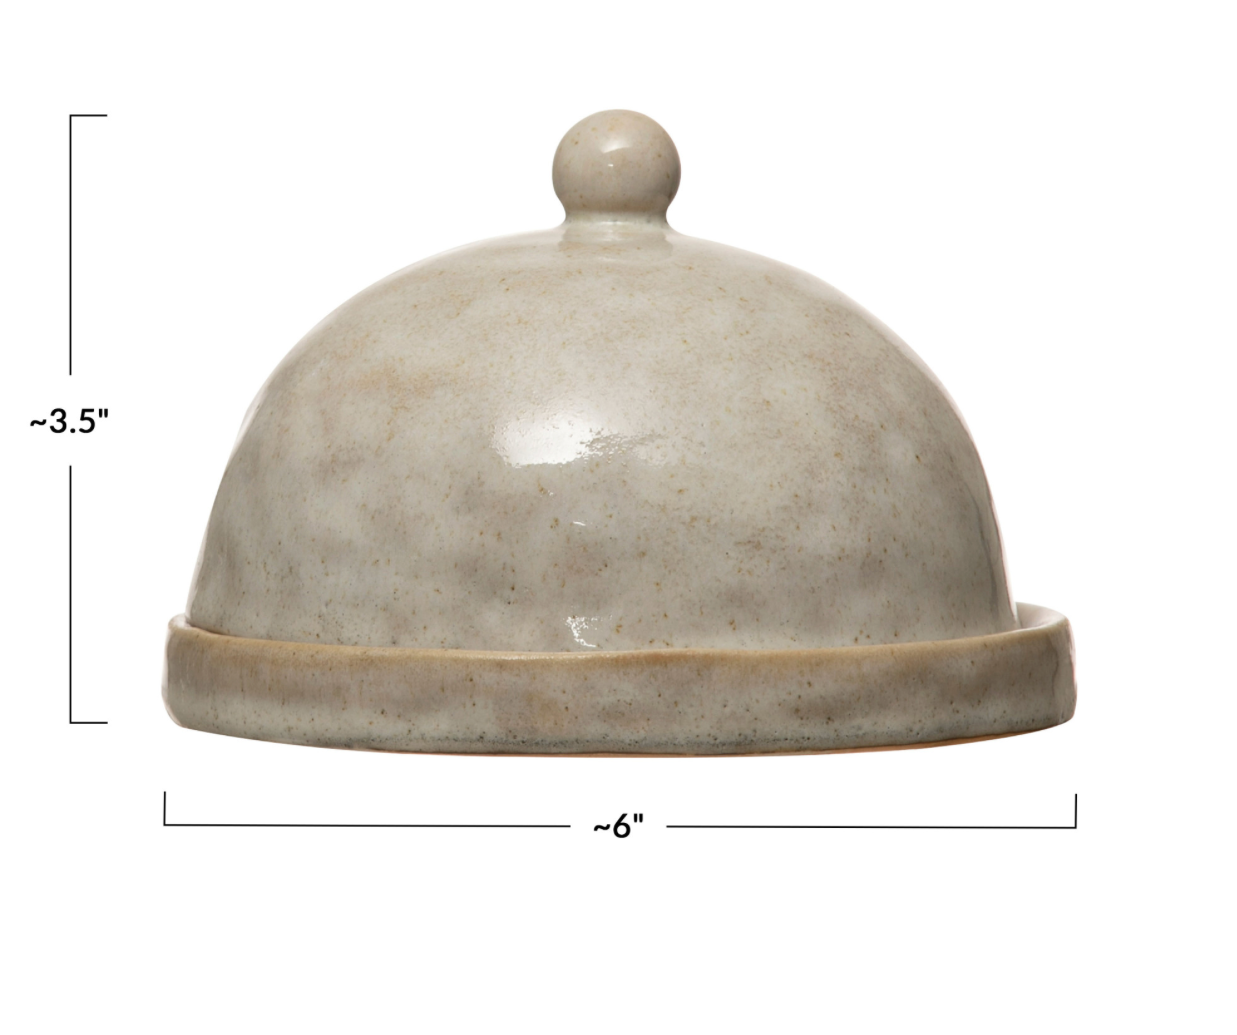 Domed Dish with Glaze